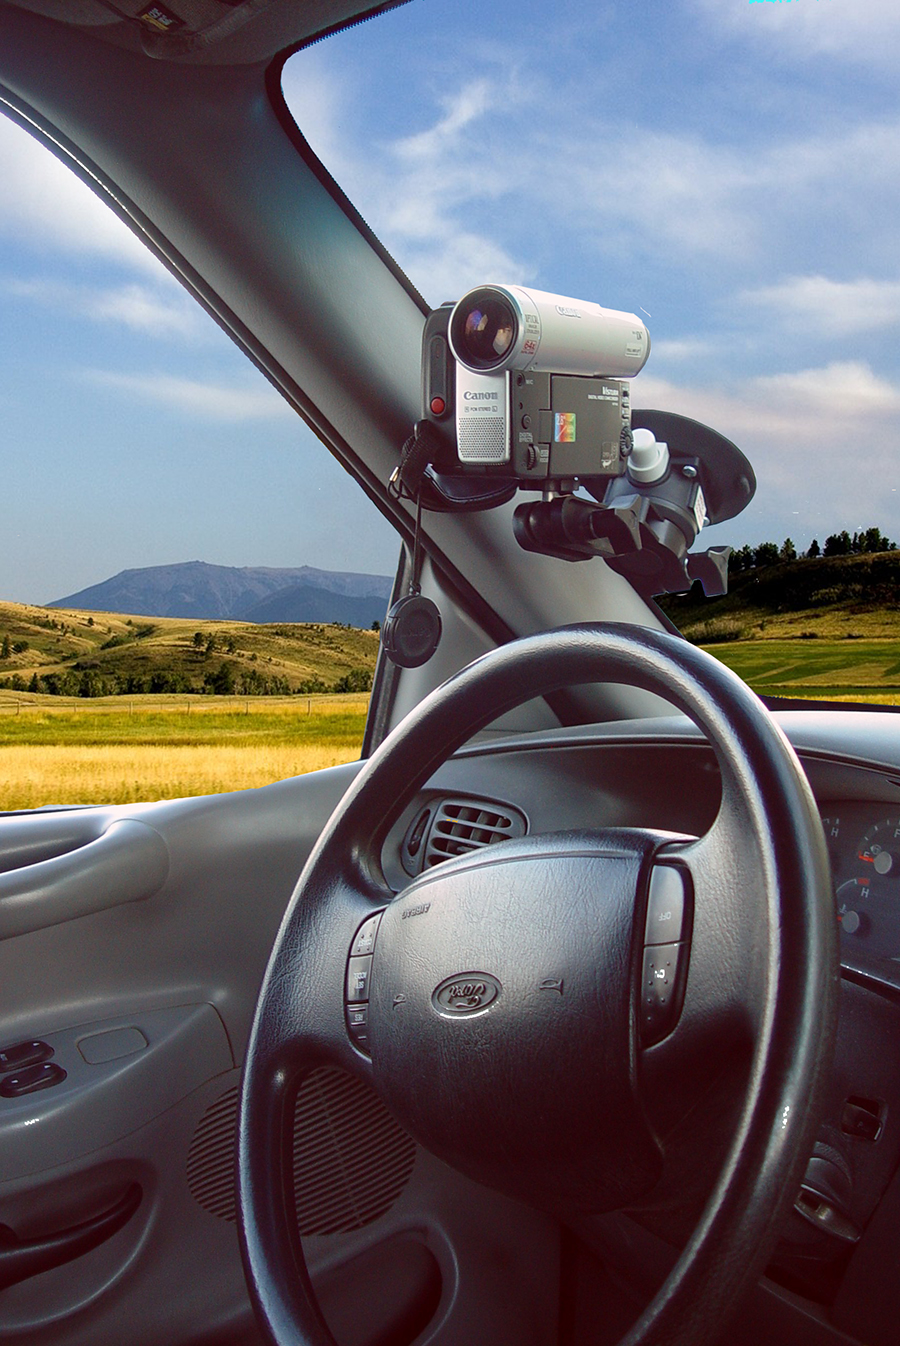 Suction Cup - Camera Mount for Cars, Boats, Motorcycles + More